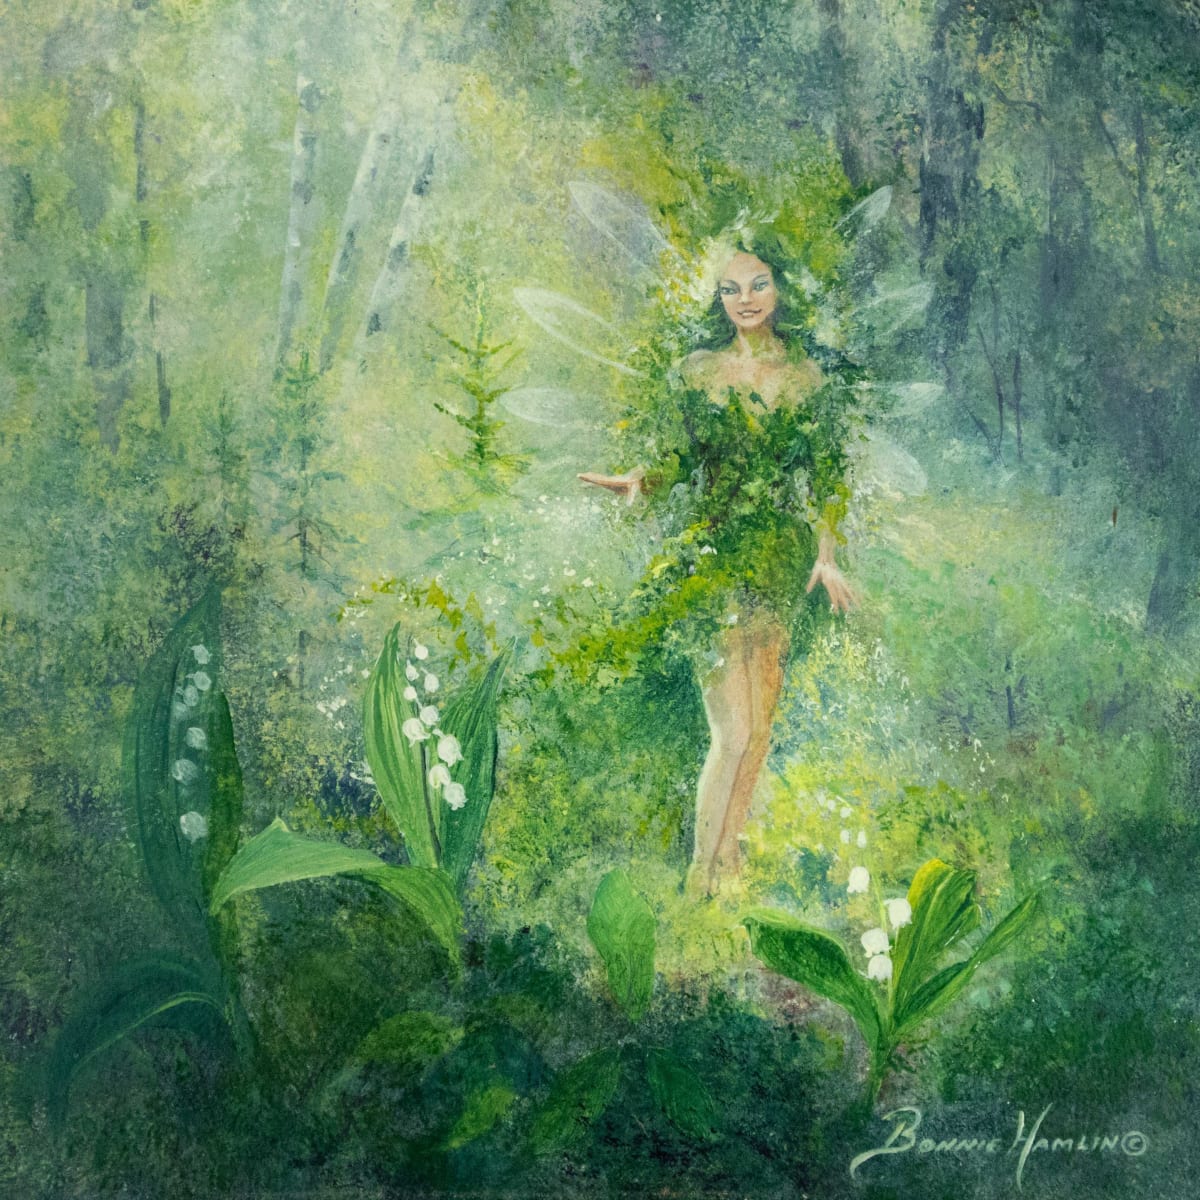 Forest Fairy Inner Joy by Bonnie Hamlin  Image: The Joy of dancing in the forest sunbeams